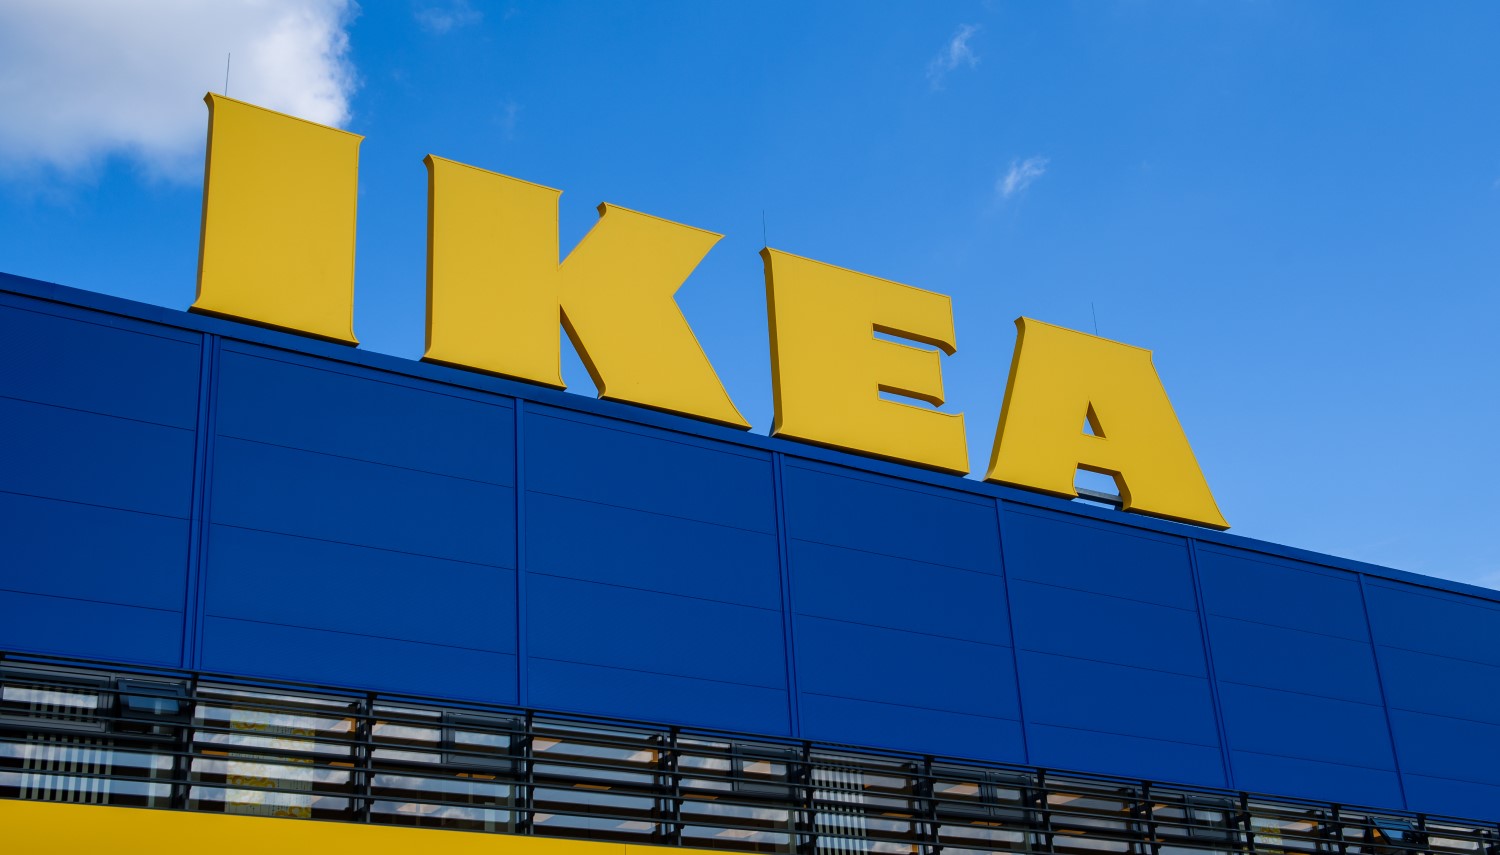 IKEA In ‘World First’ Transaction Using Smart Contracts And Licensed E-Money